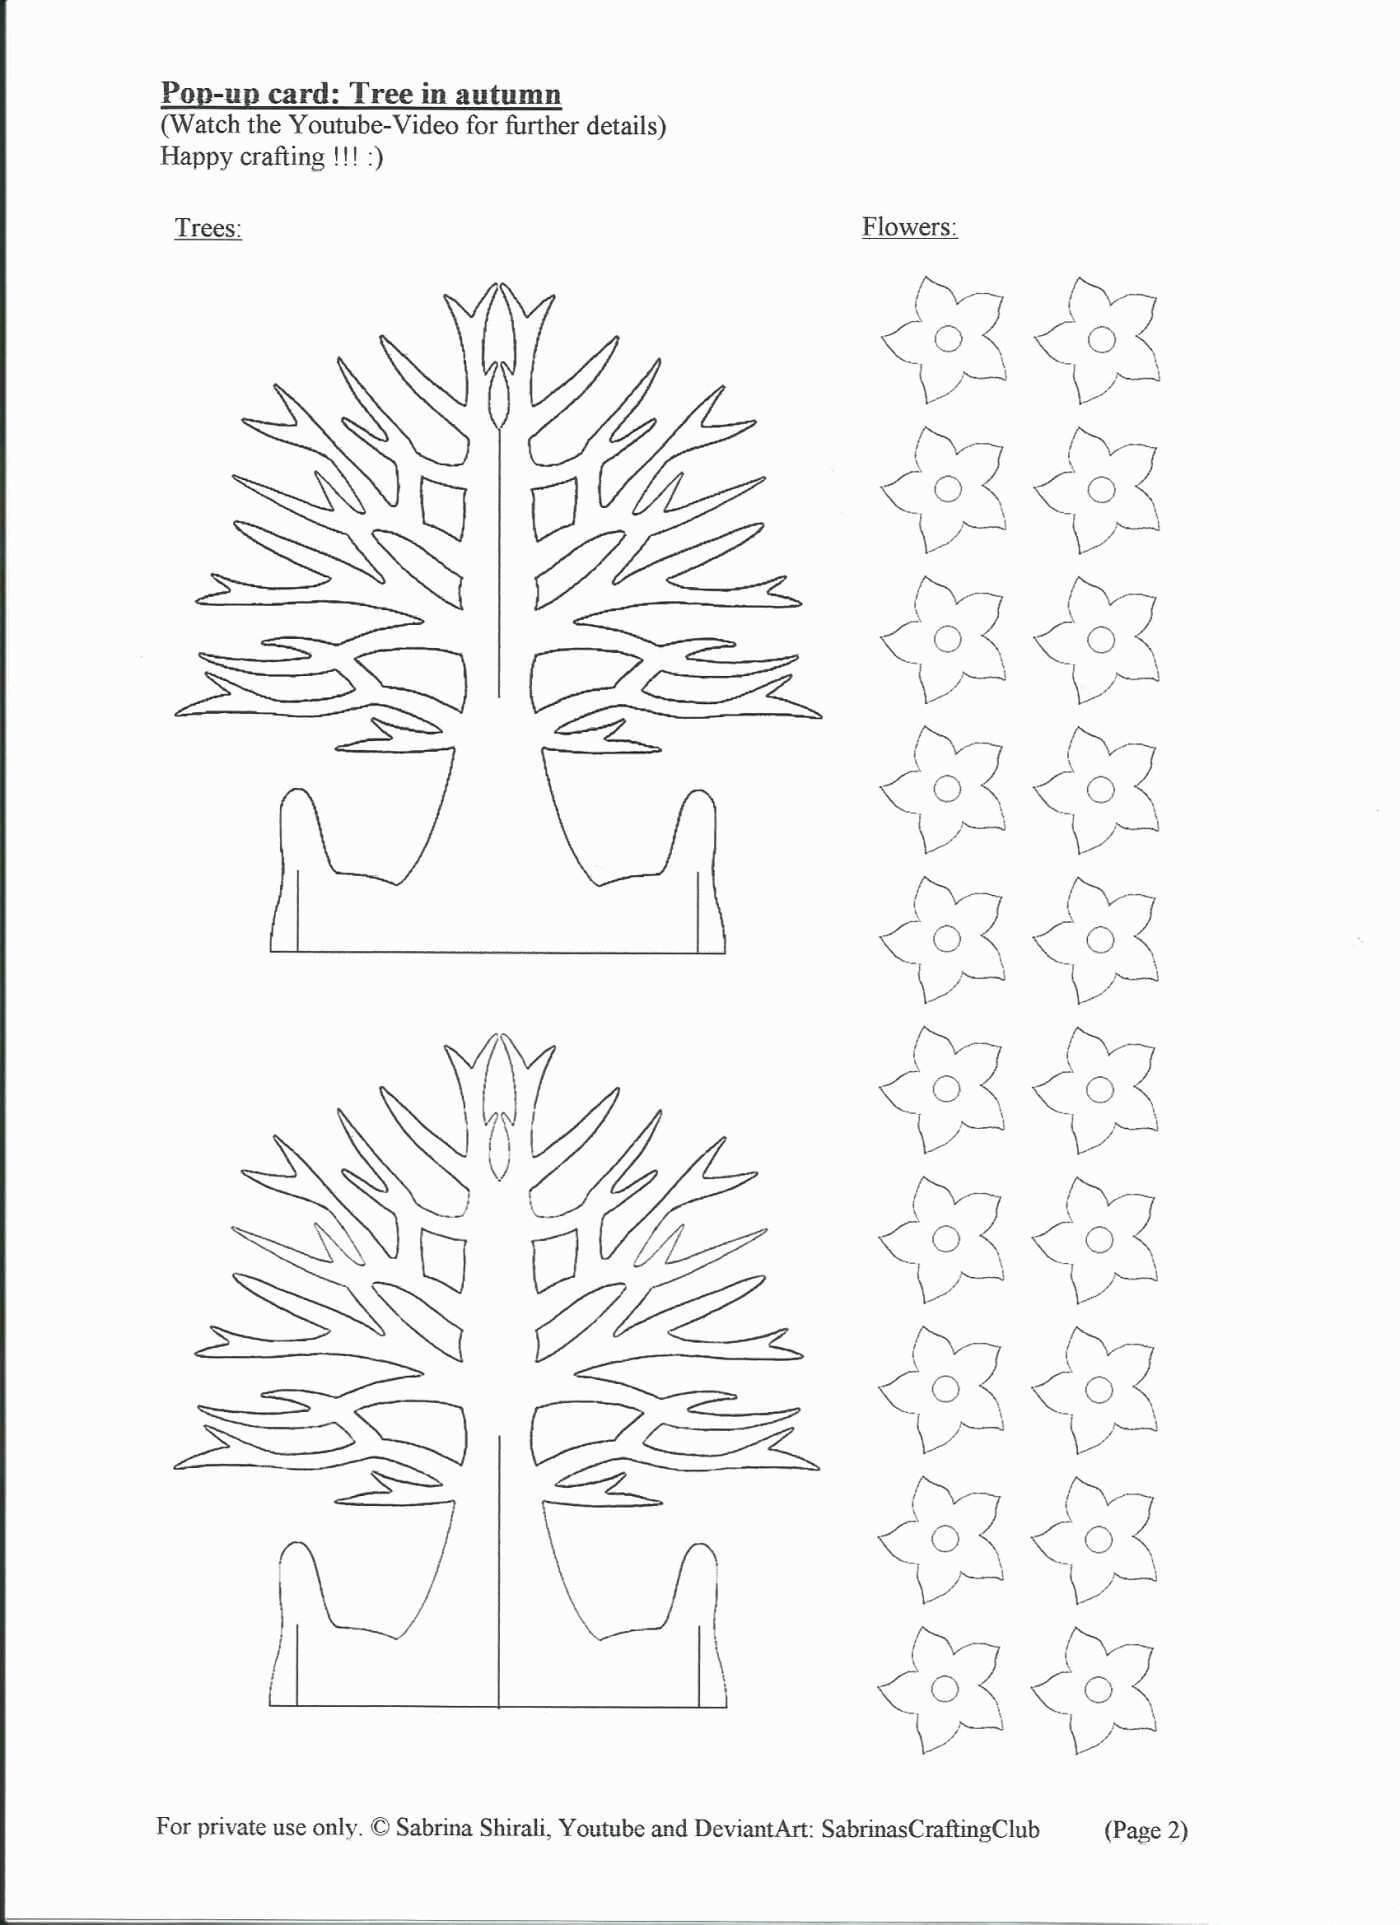 72 Free Printable Pop Up Card Templates Tree For Freepop Intended For Printable Pop Up Card Templates Free